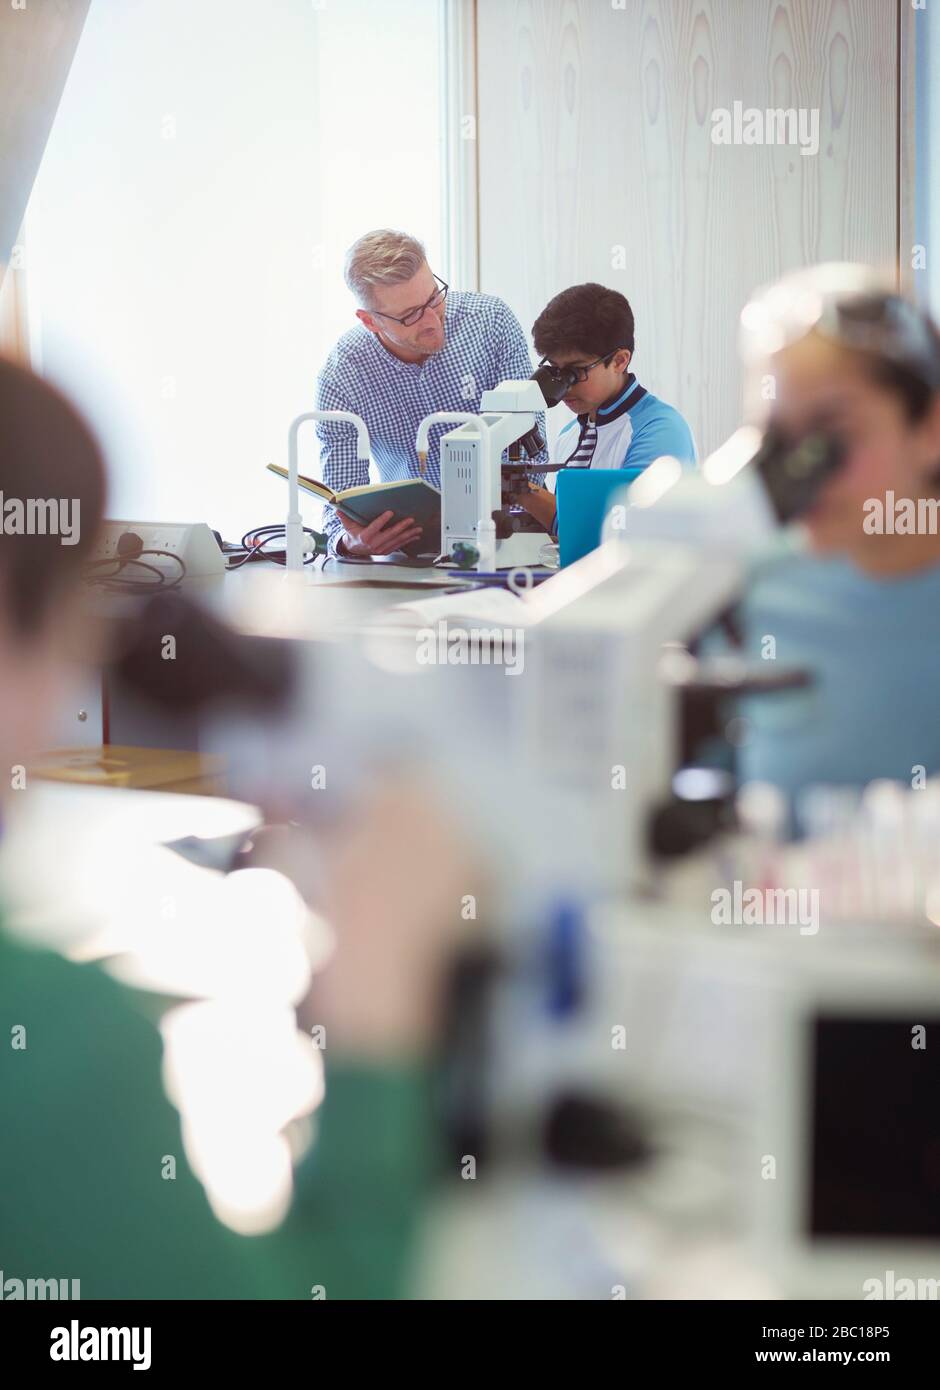 Male teacher and boy student using microscope, conducting scientific experiment in laboratory classroom Stock Photo